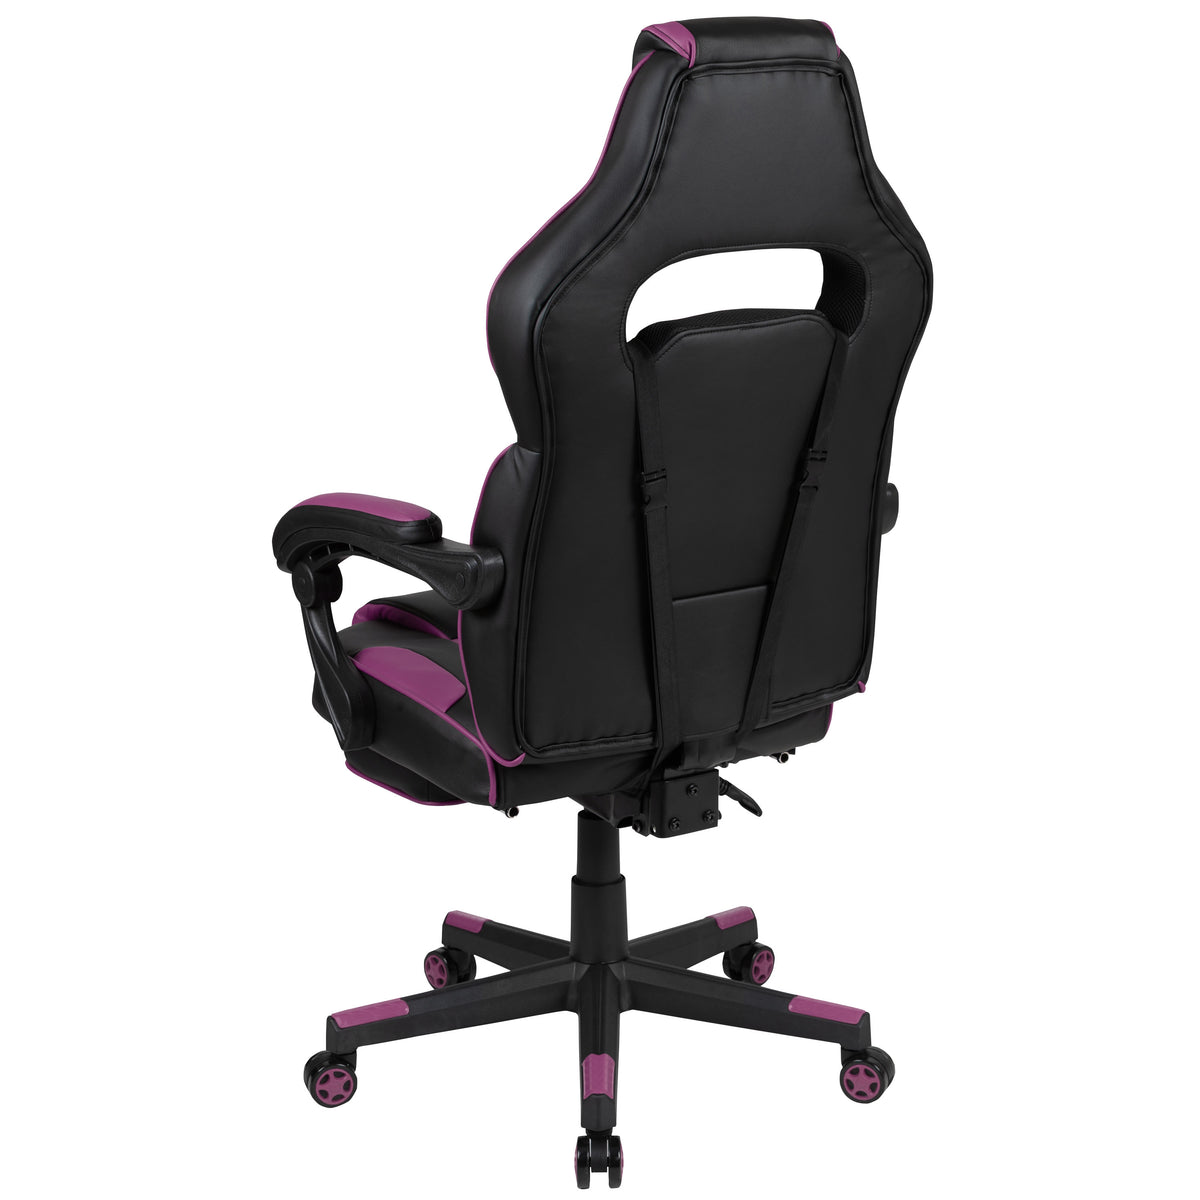 Black with Purple Trim |#| Fully Reclining Gaming Chair with Slideout Footrest, Lumbar Massage-Black/Purple